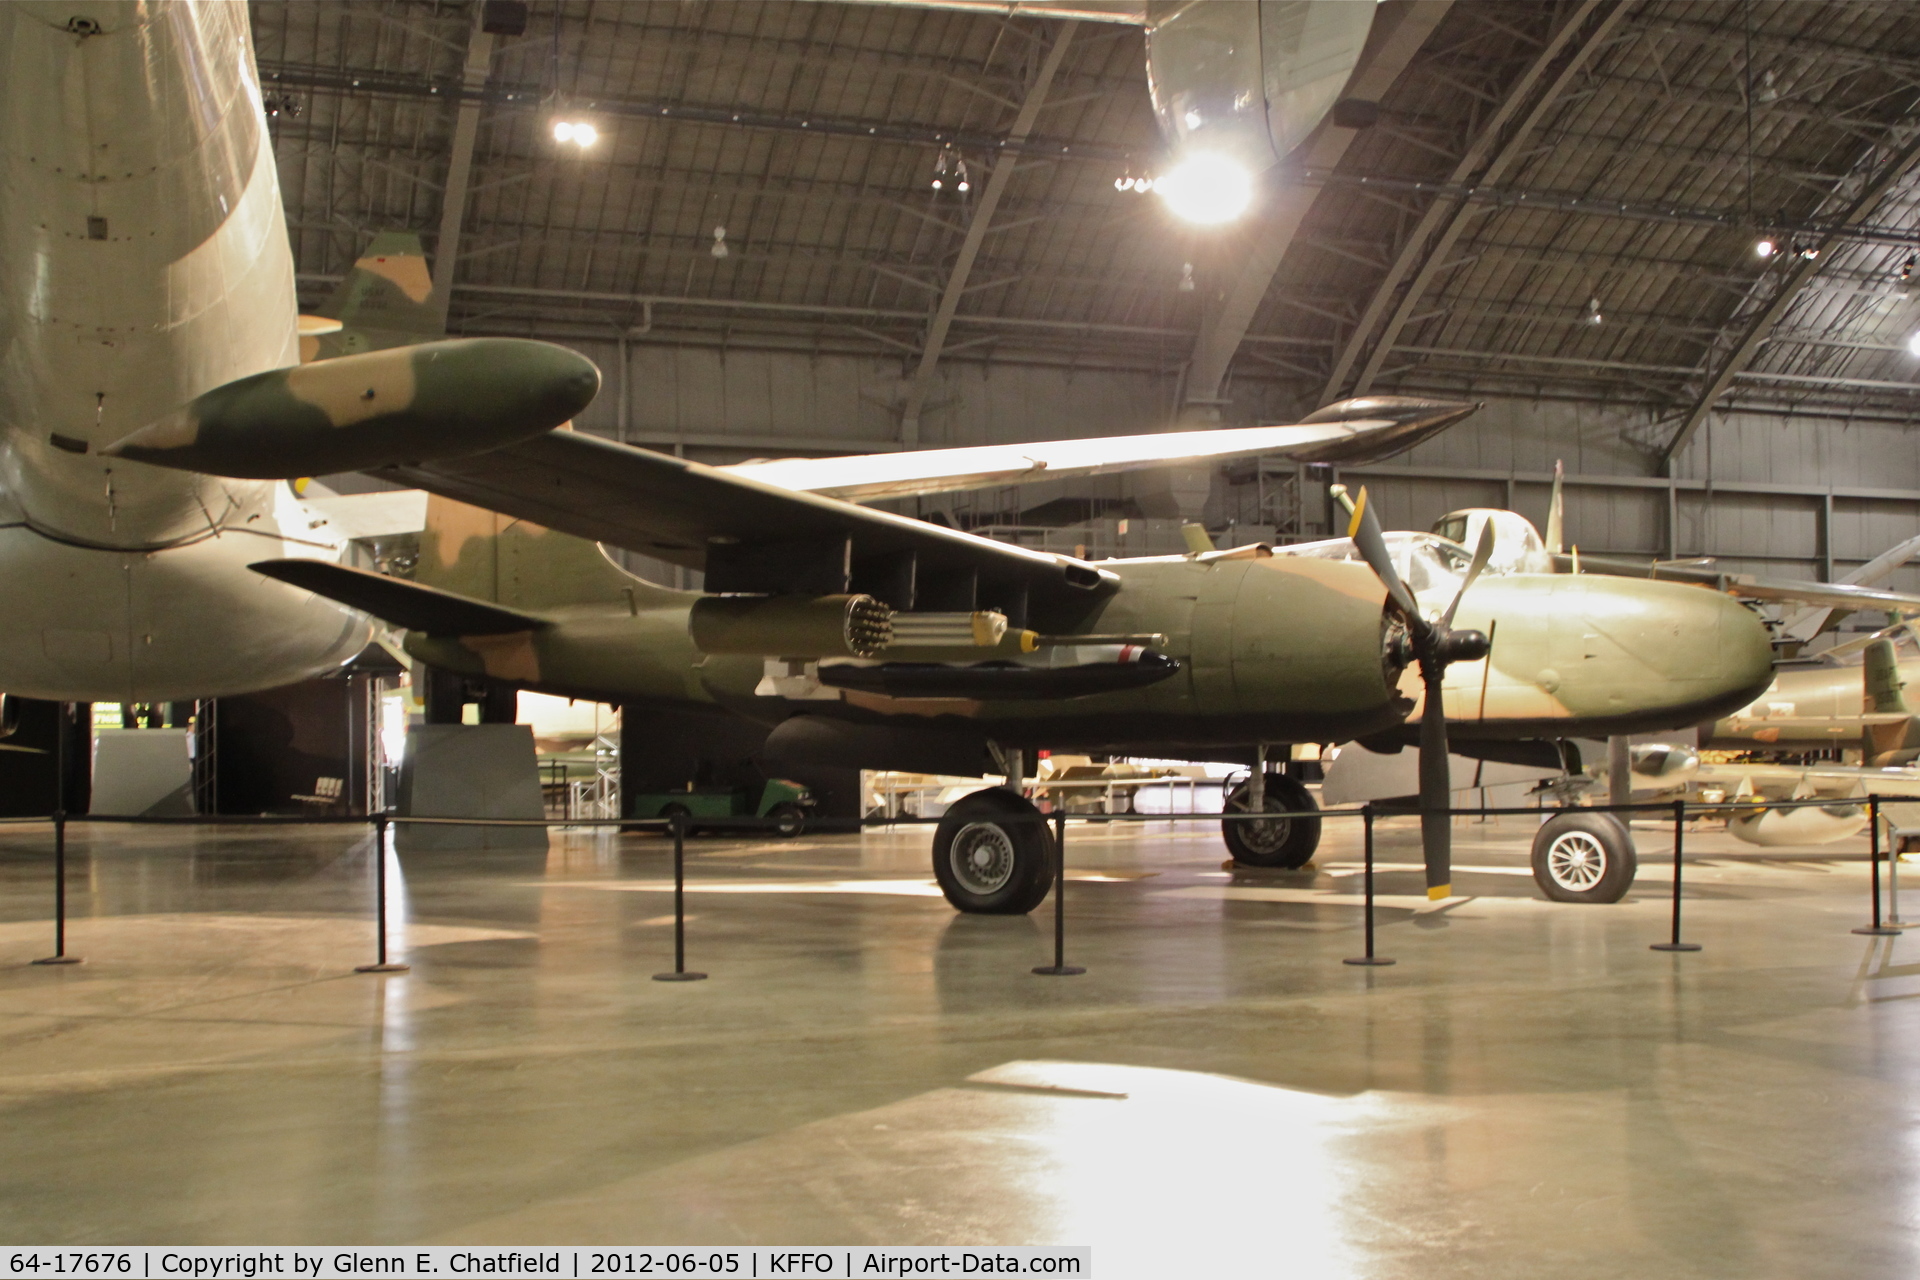 64-17676, 1971 Douglas-On Mark B-26K Counter Invader C/N 7309 (was 41-39596), At the Air Force Museum